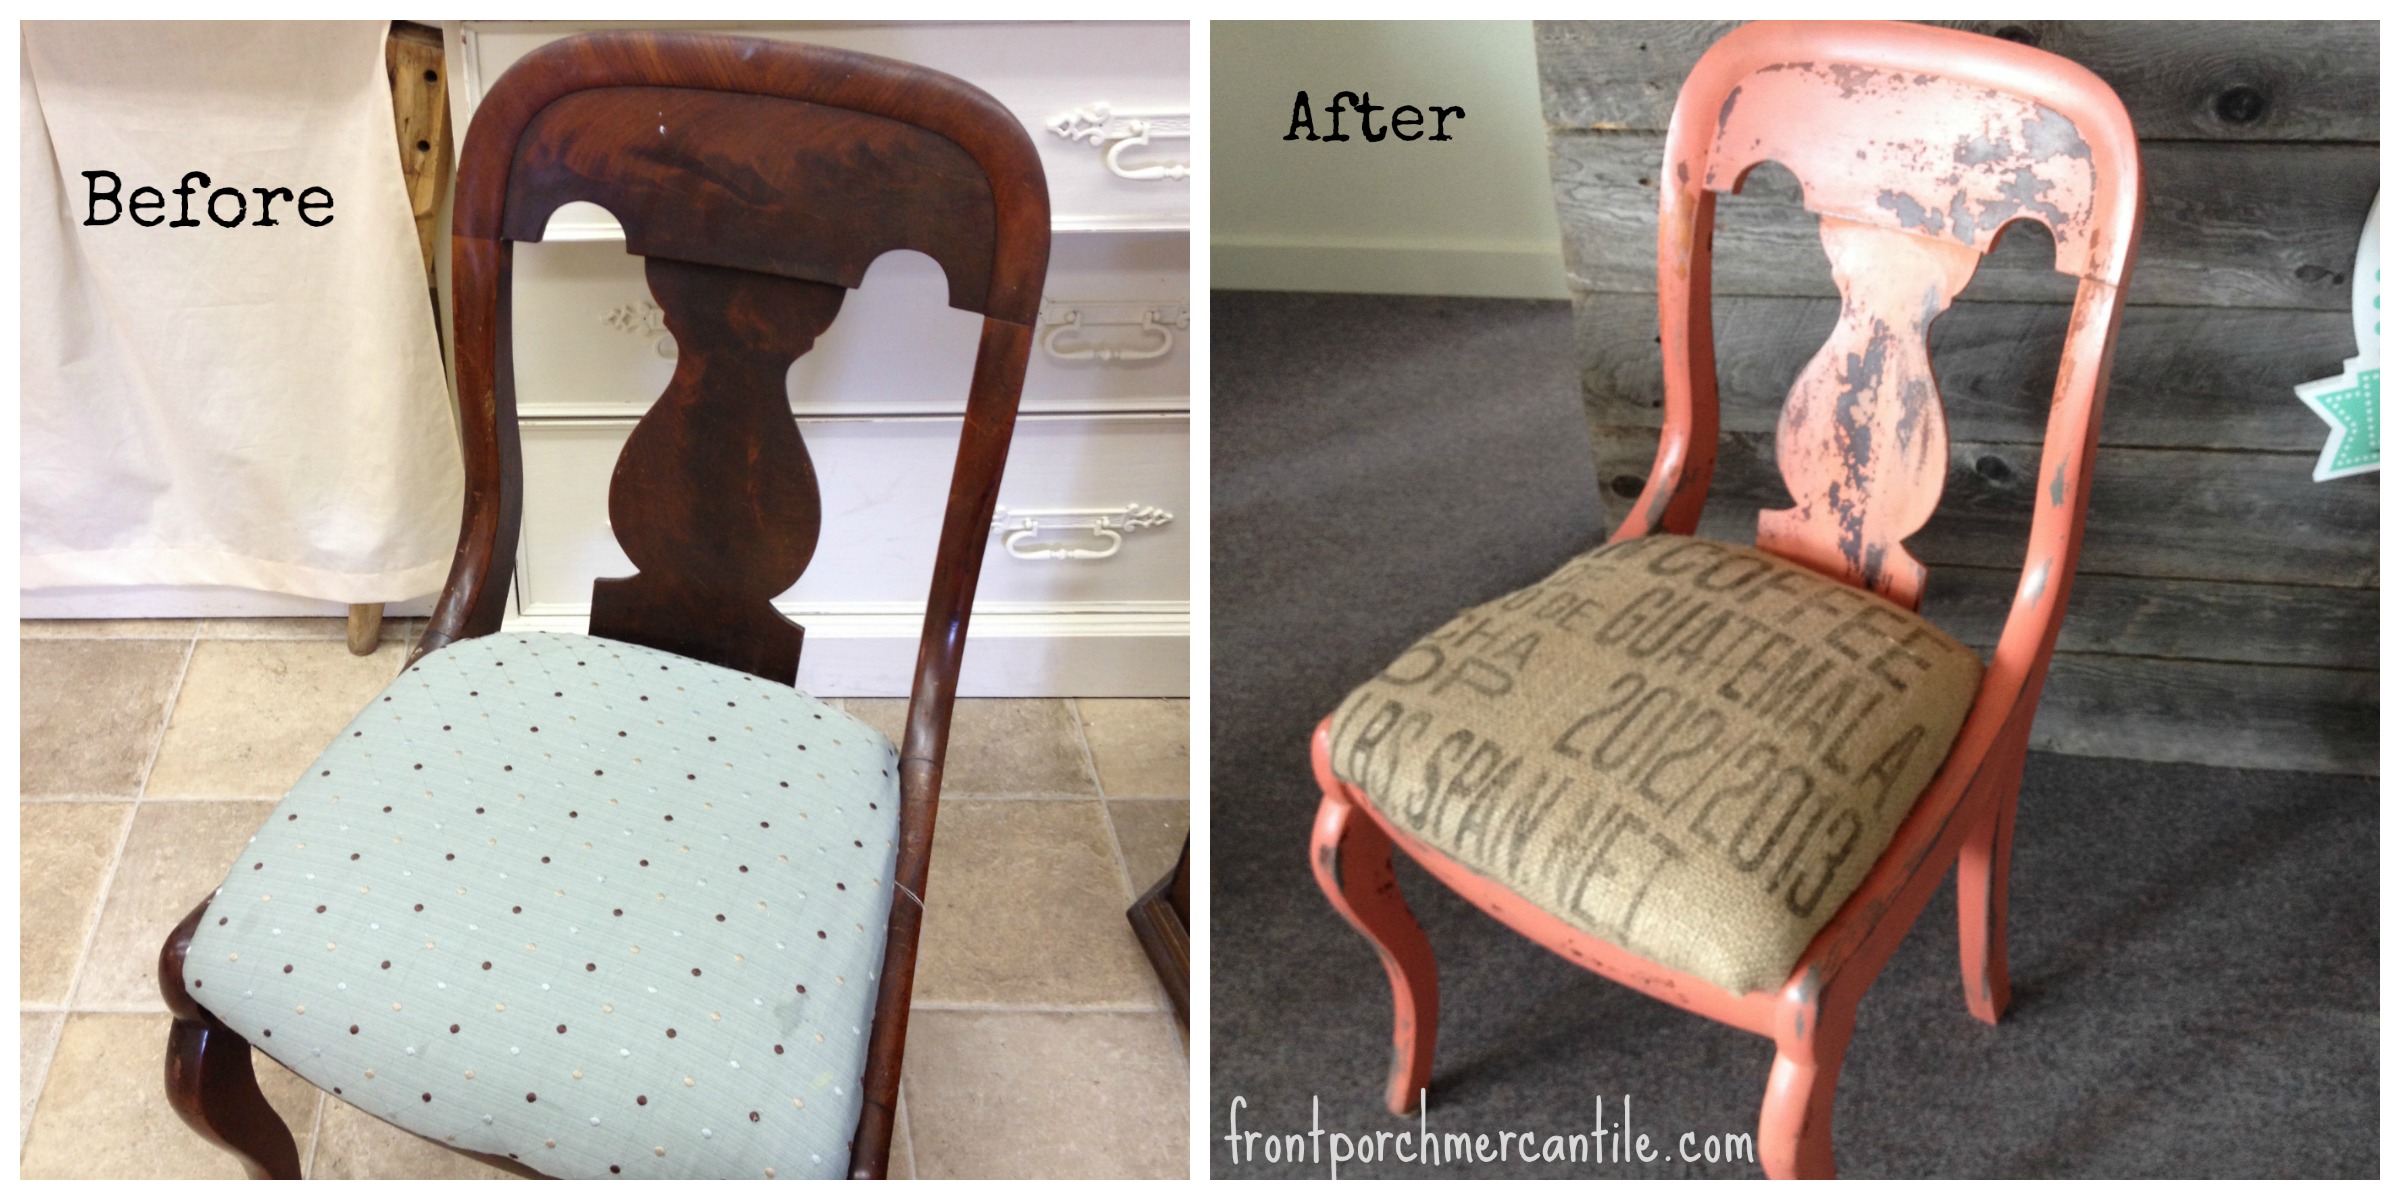 before/after chippy chair frontporchmercantile.com